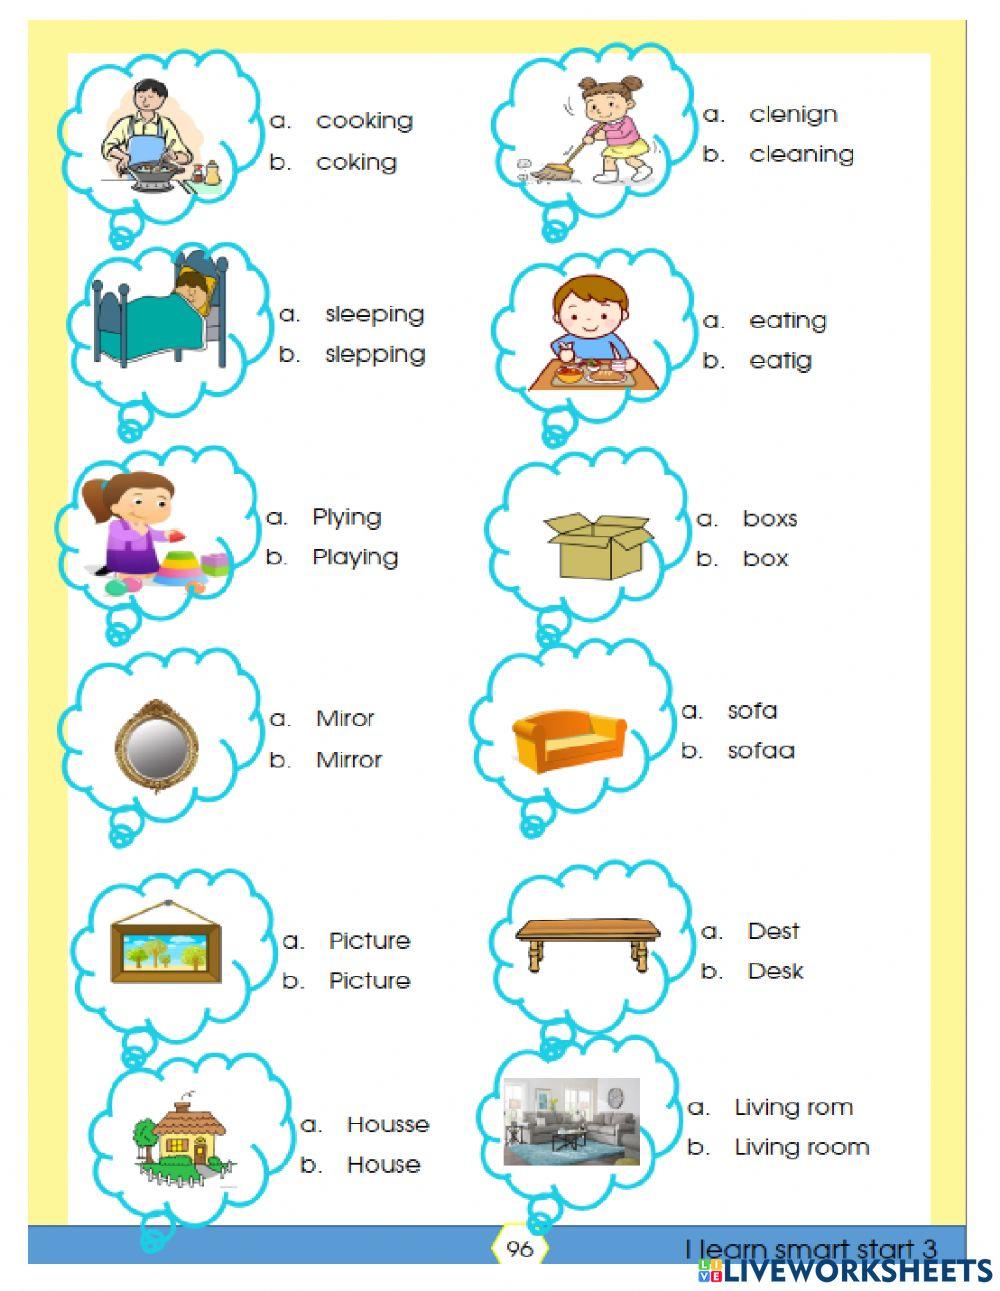 Things at home - ESL worksheet by xhily4u